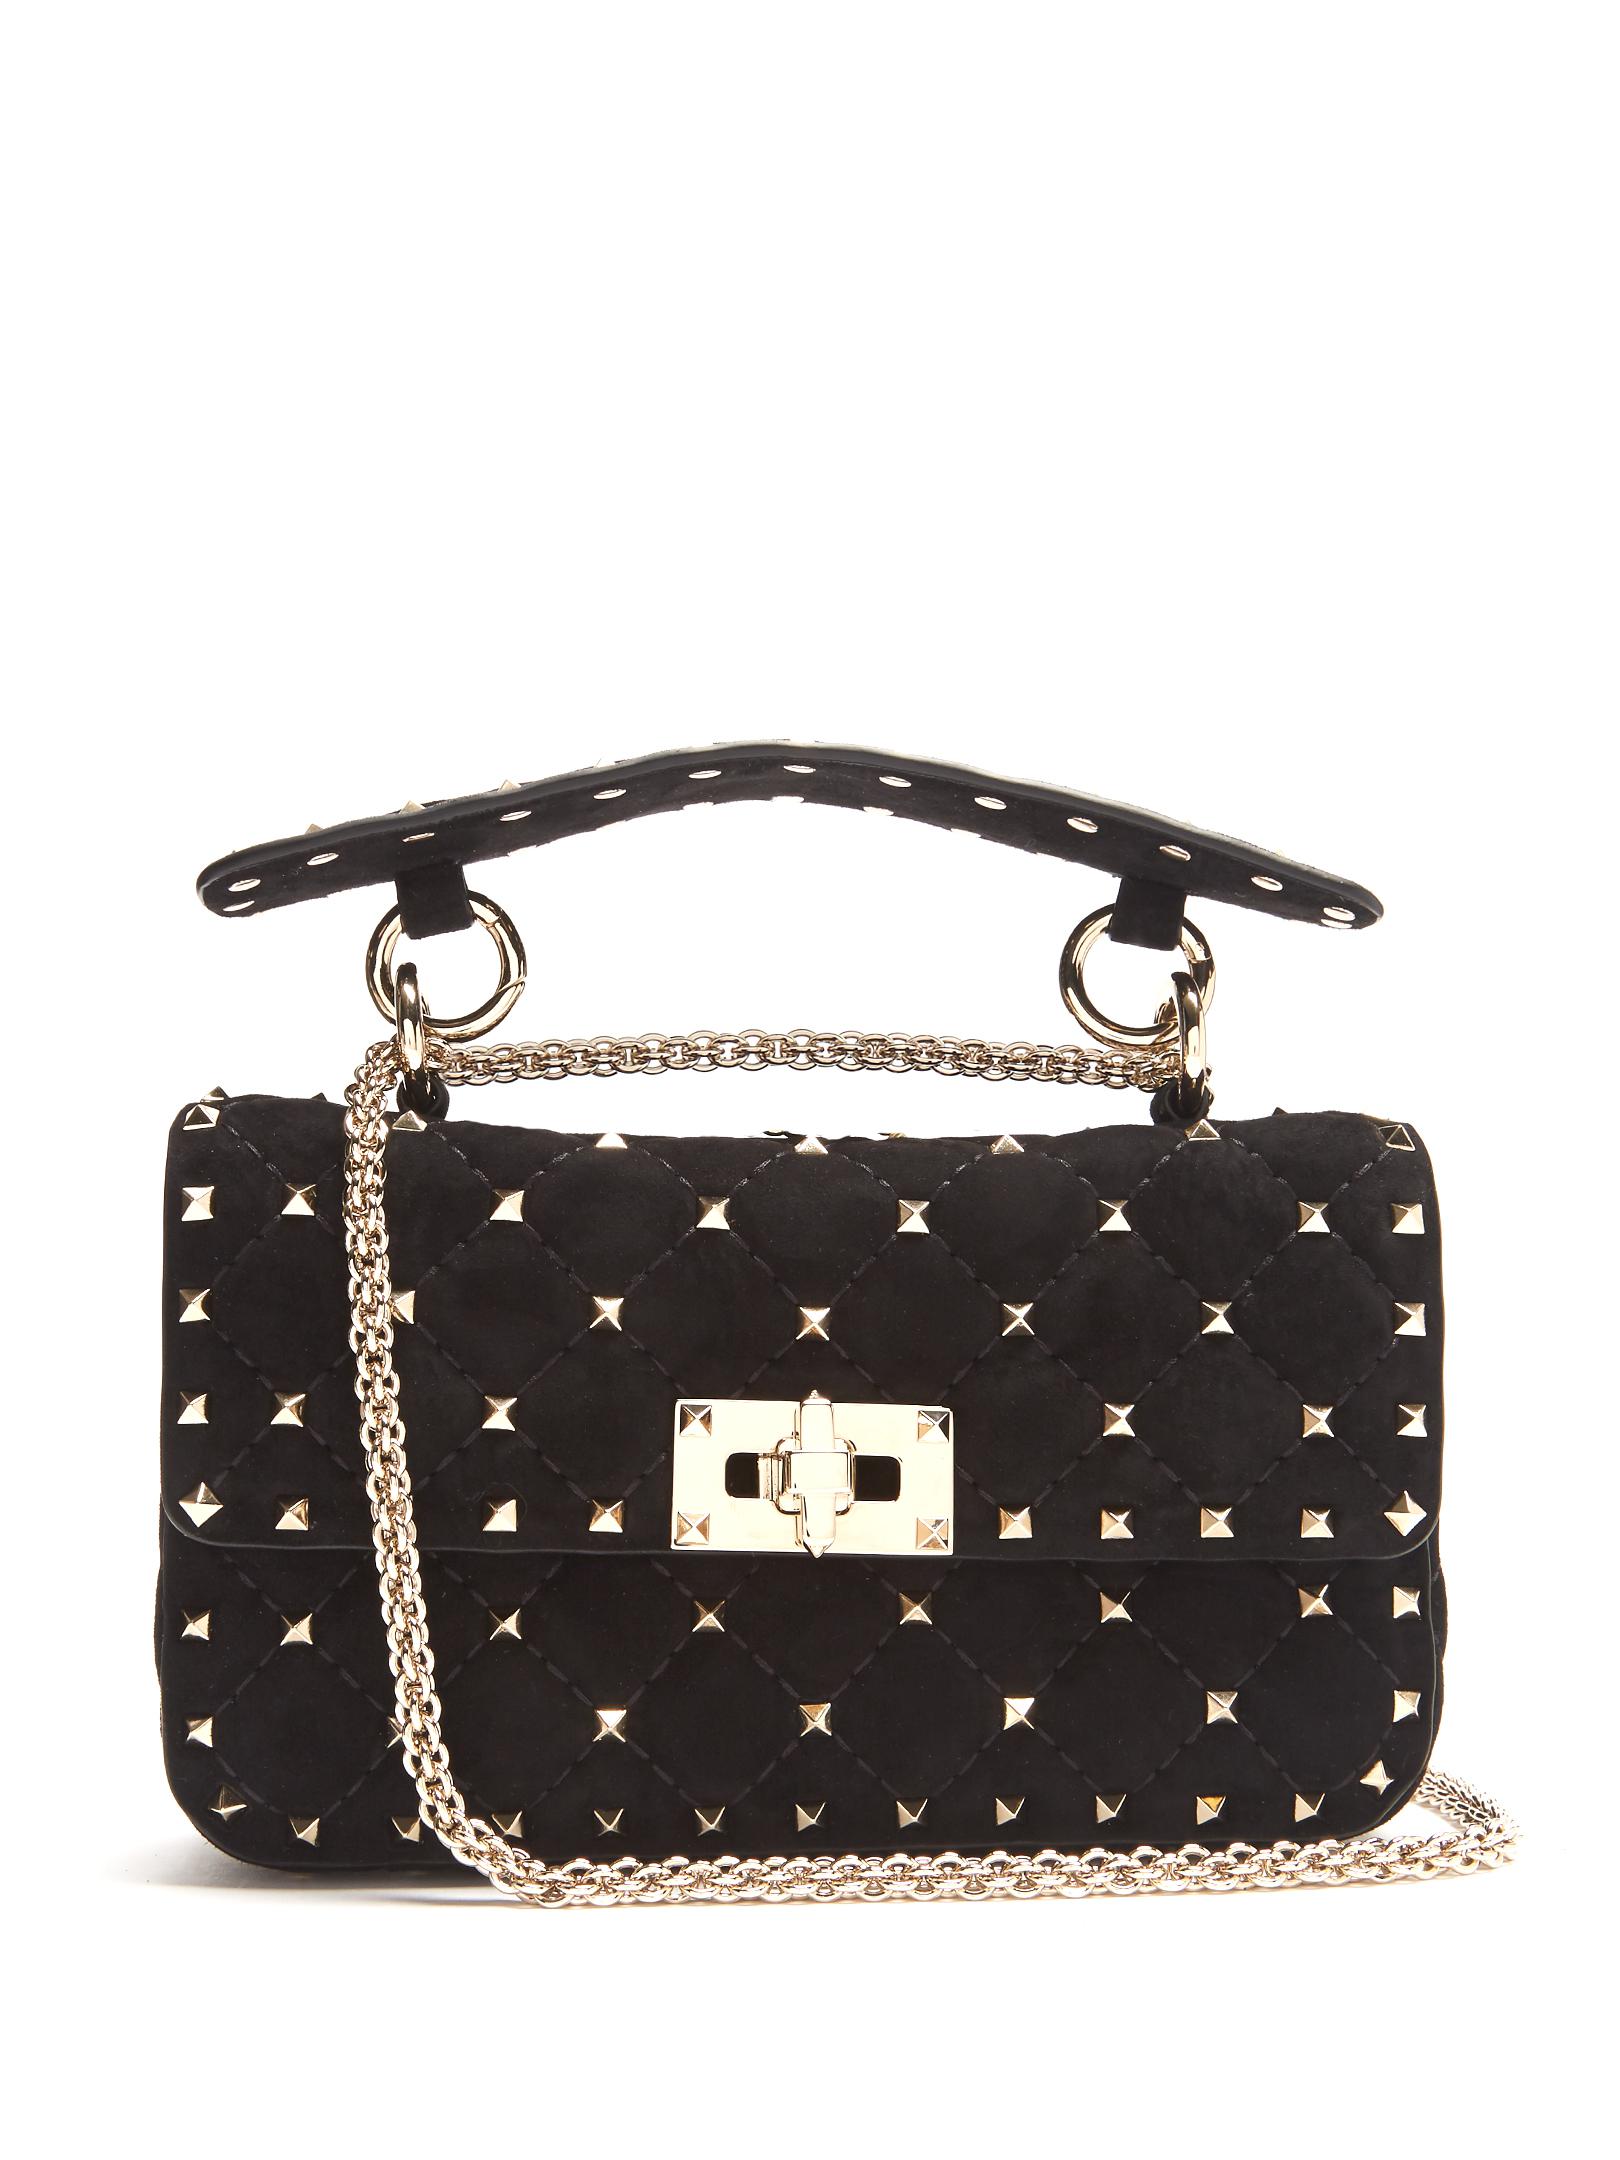 Lyst - Valentino Rockstud Spike Small Quilted-suede Shoulder Bag in Black